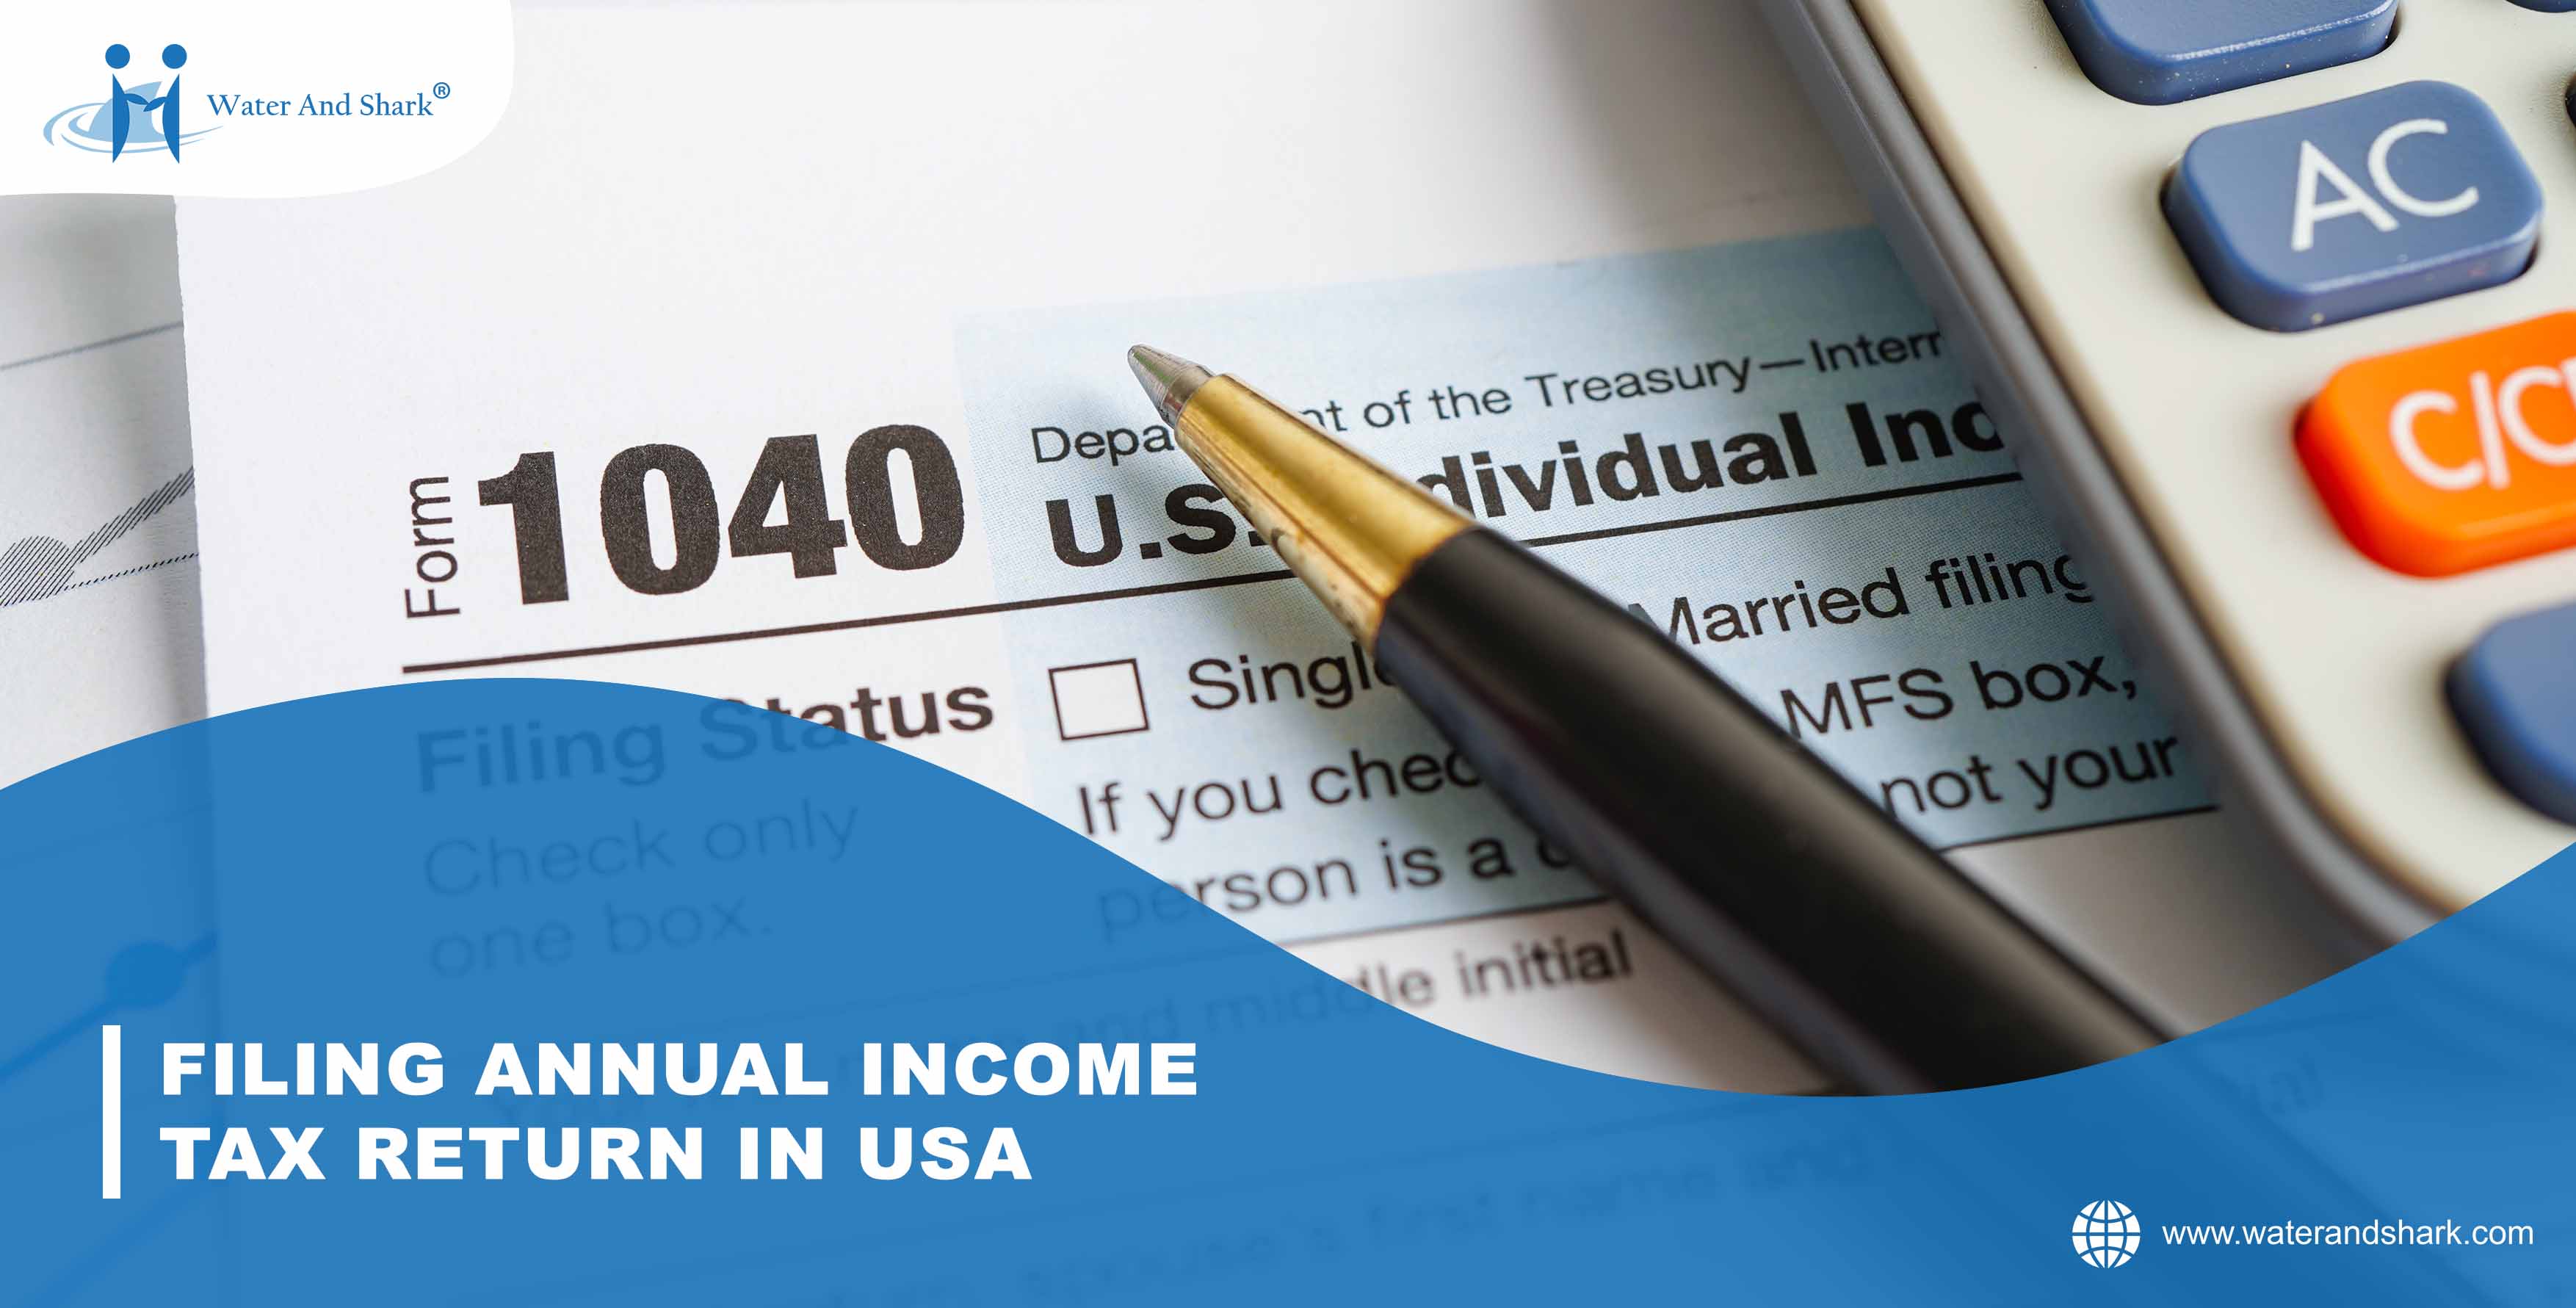 650x1280_FILING_ANNUAL_INCOME_TAX_RETURN_IN_USA_LOW_SIZE.jpg